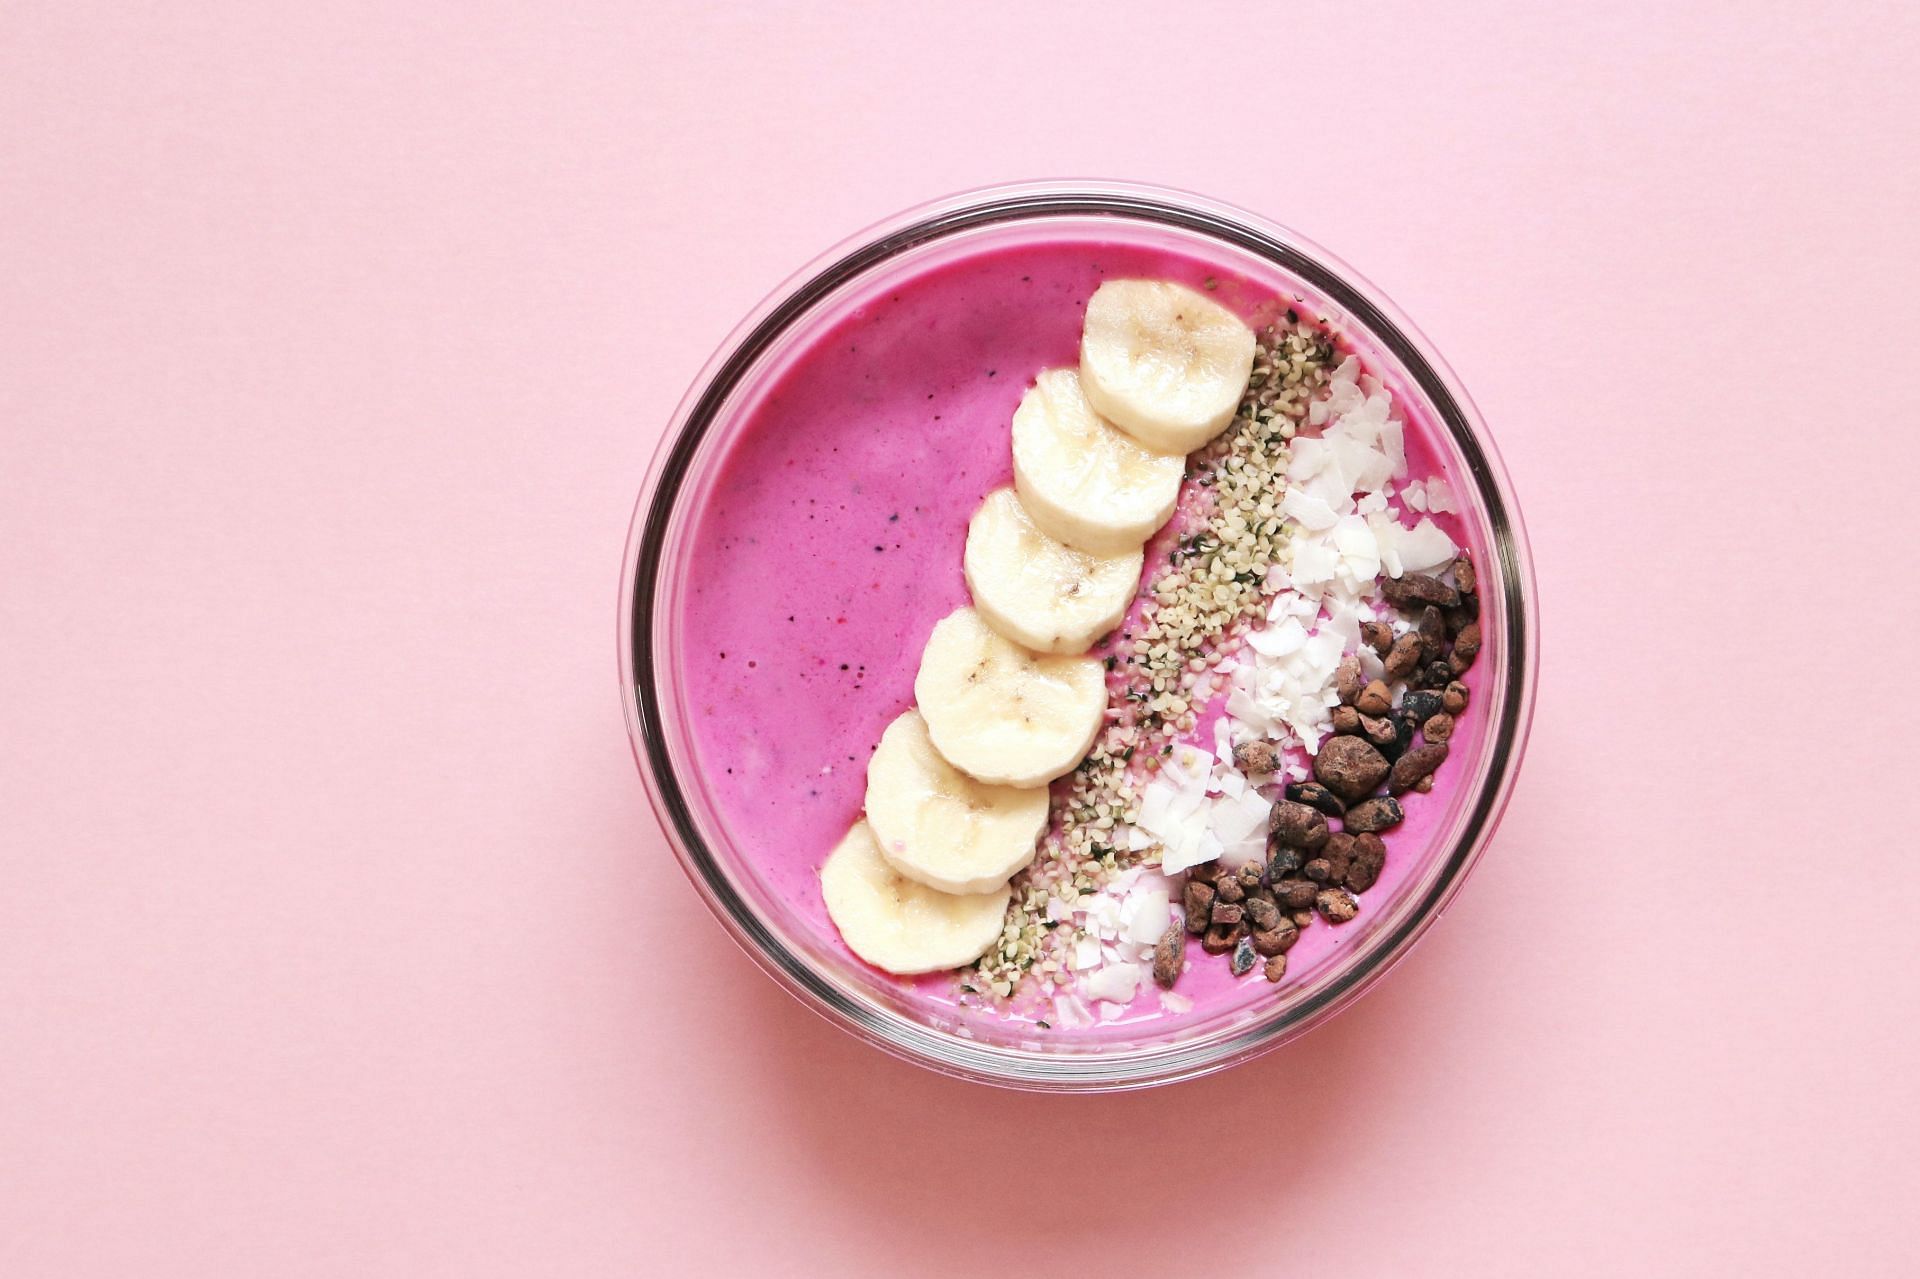 One reason why chia seeds good for you is because they are loaded with antioxidants. (Image via Pexels / Madison Inouye)